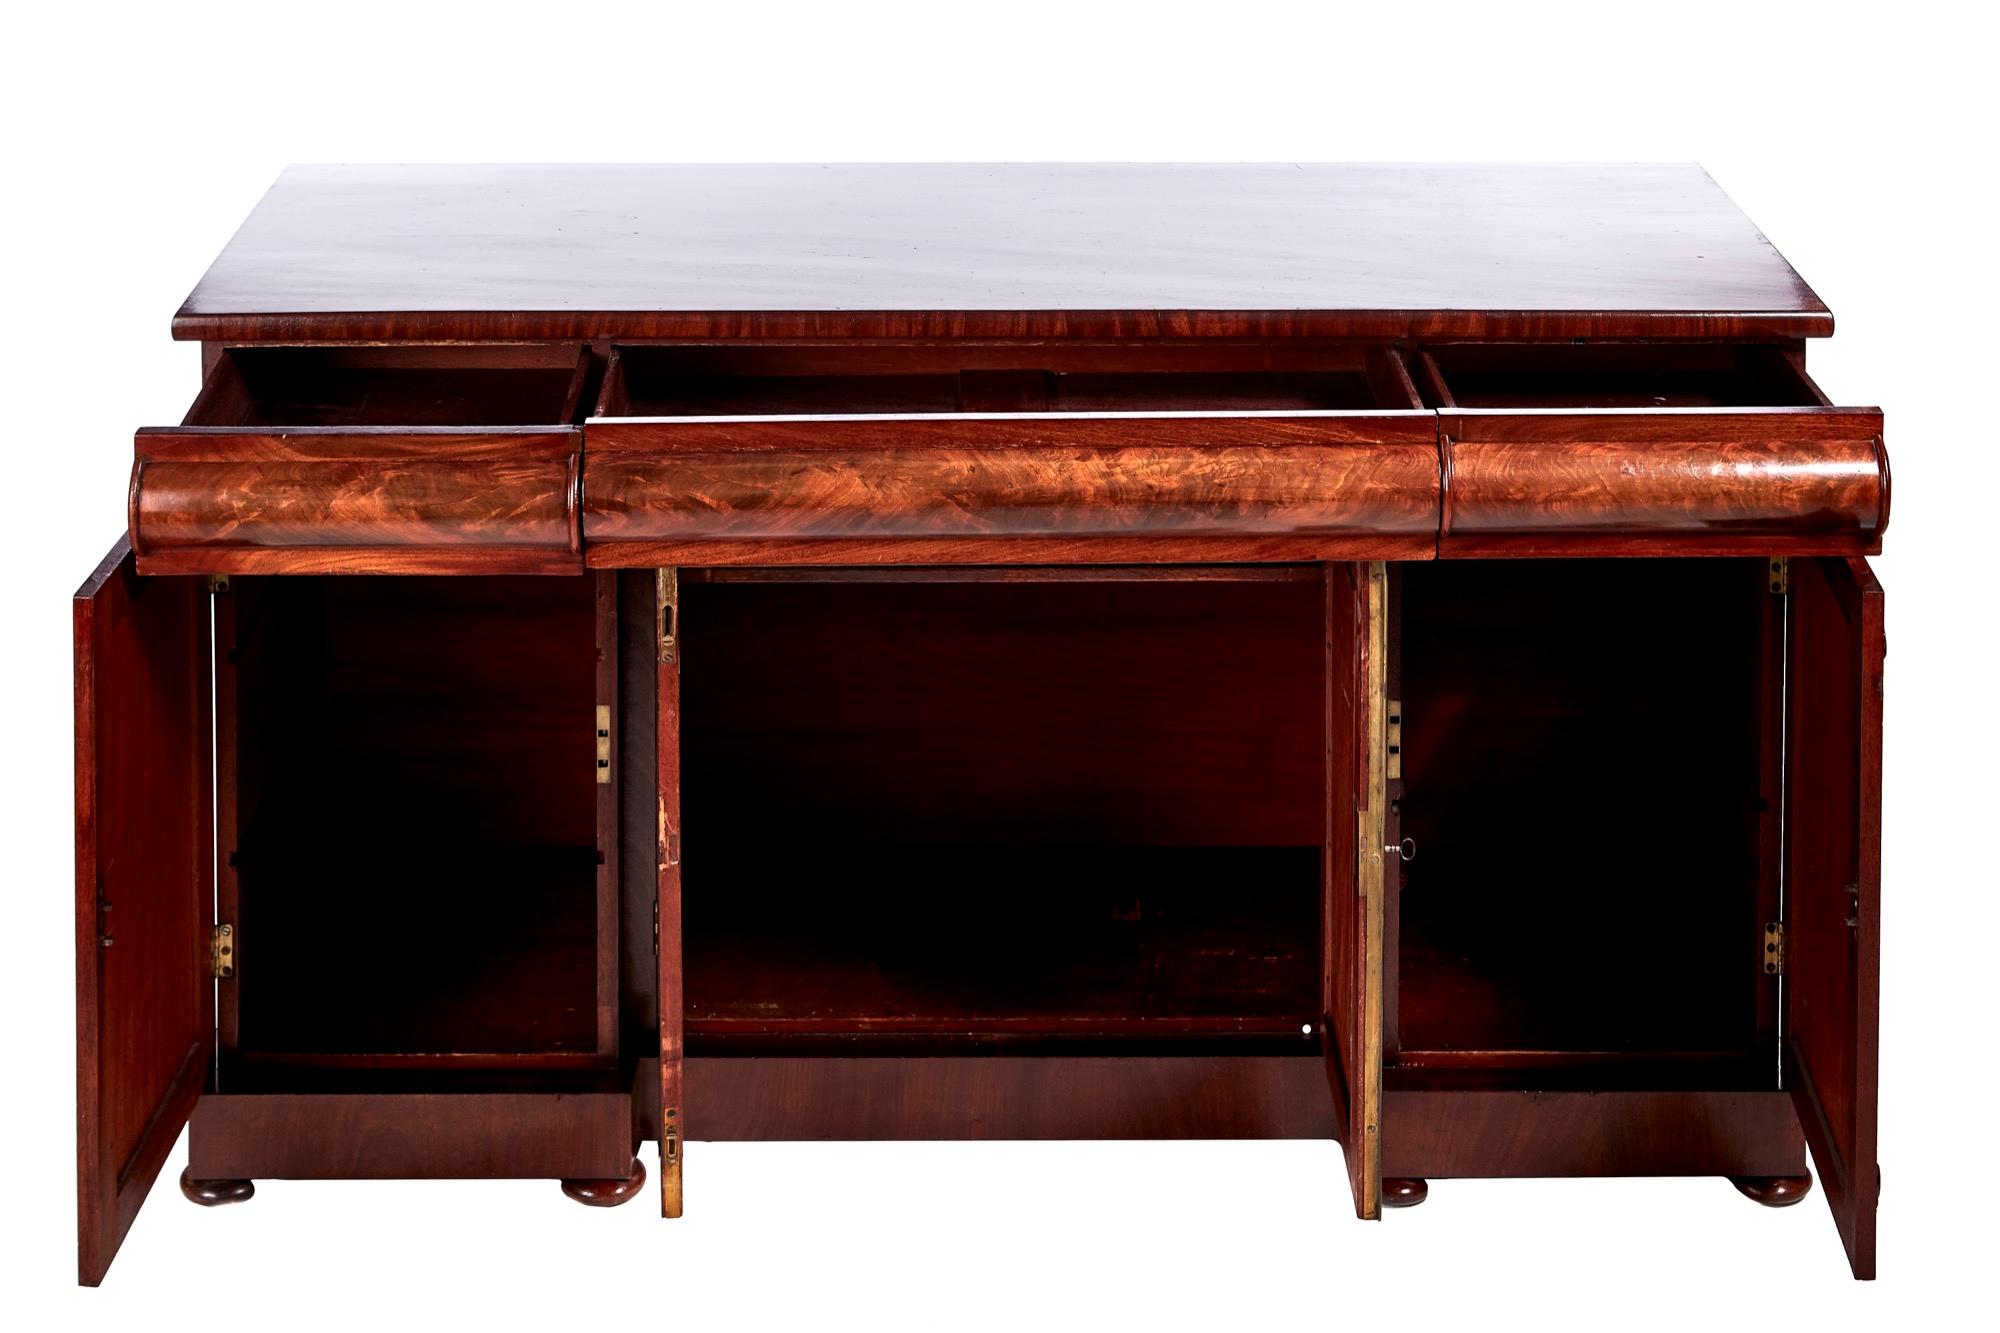 Fine quality William IV mahogany sideboard having a lovely quality mahogany top, 3 frieze drawers with shaped fronts, 4 figured mahogany panelled doors with quality carvings, standing on a plinth base with original bun feet.
Fantastic color and